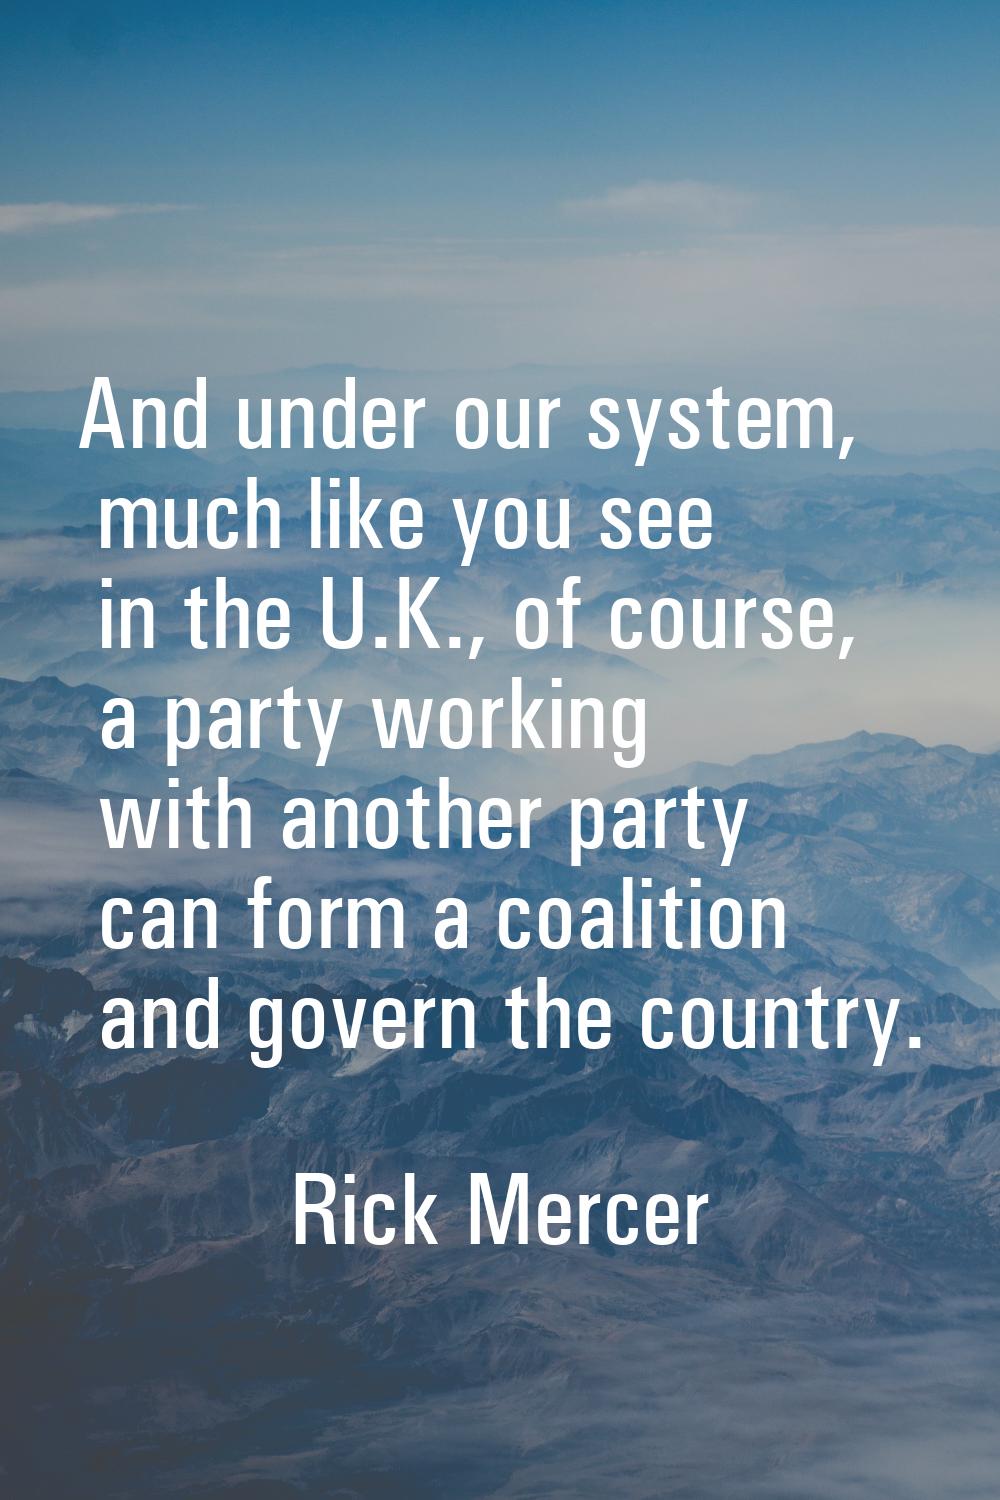 And under our system, much like you see in the U.K., of course, a party working with another party 